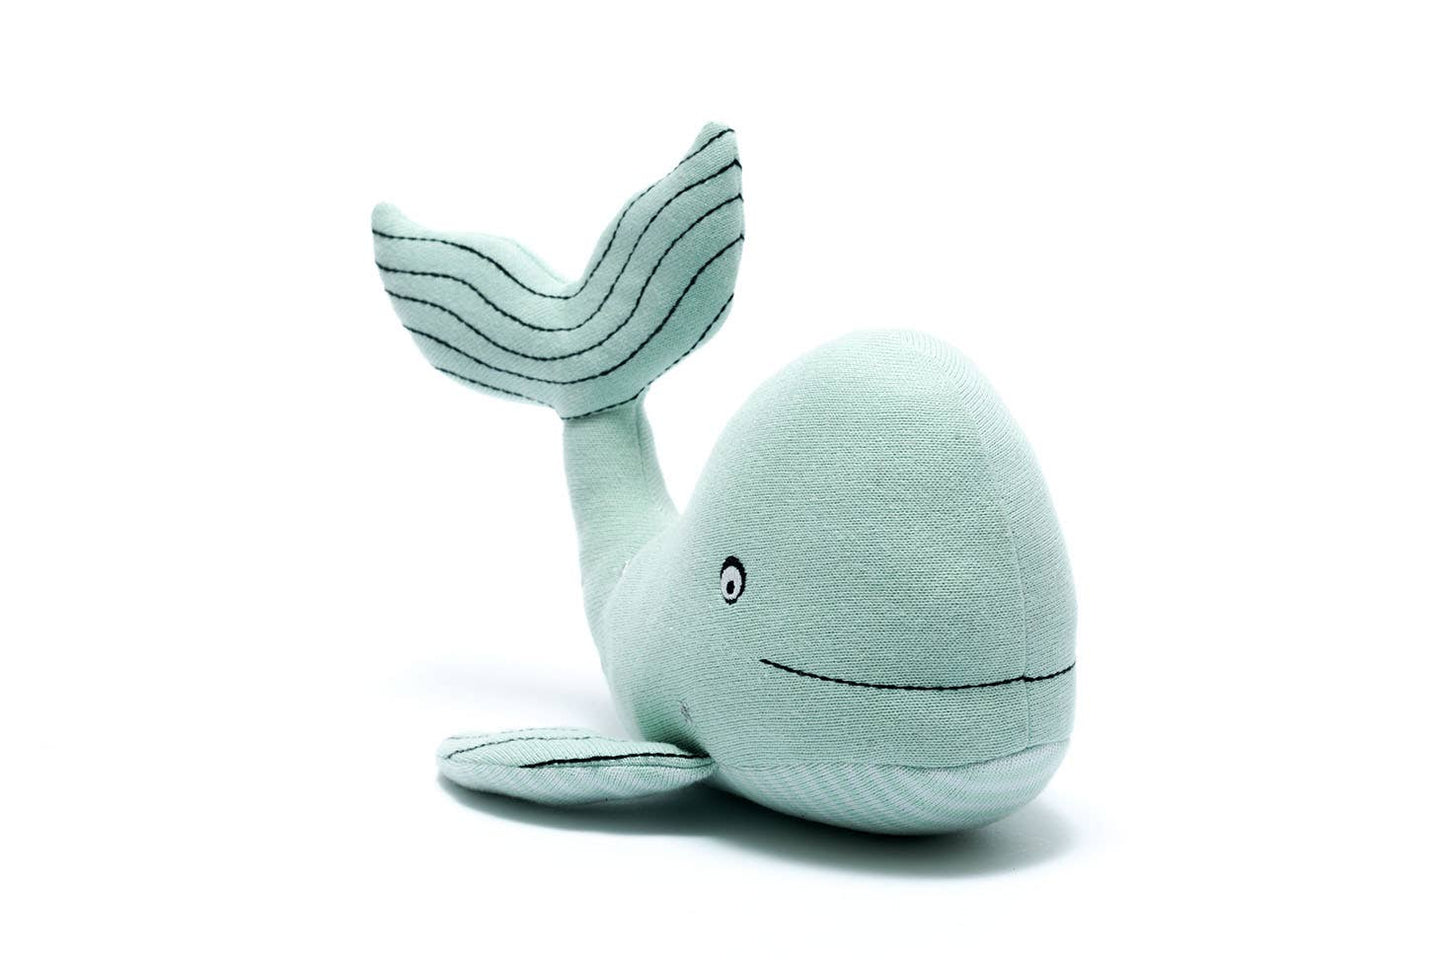 Tactile knitted organic cotton sea green whale plush toy